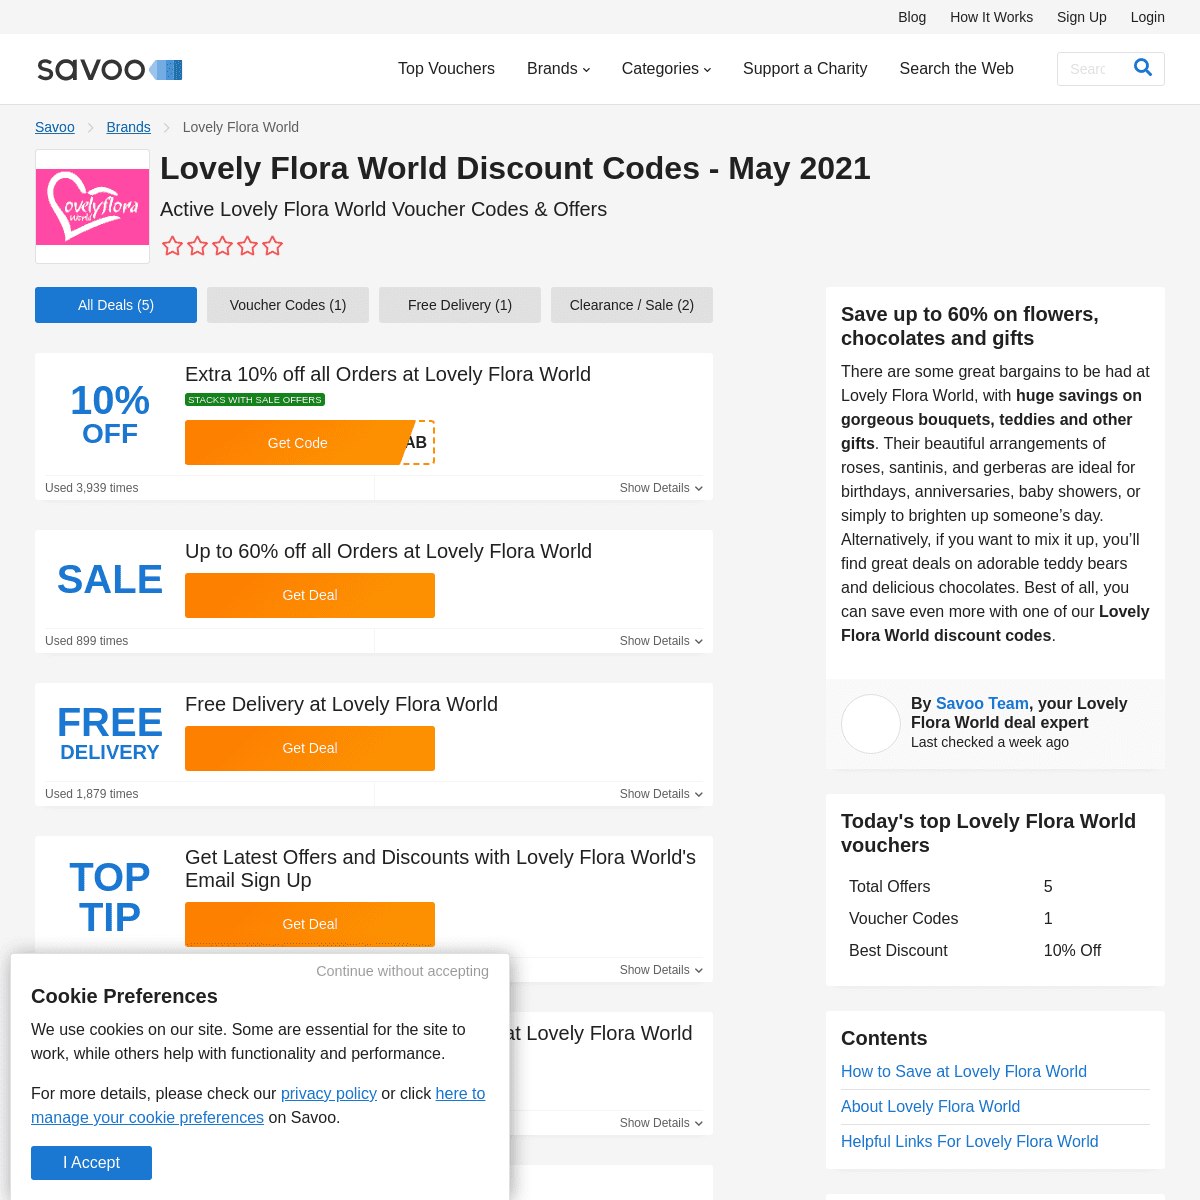 A complete backup of https://www.savoo.co.uk/brands/lovely-flora-world-discount-codes